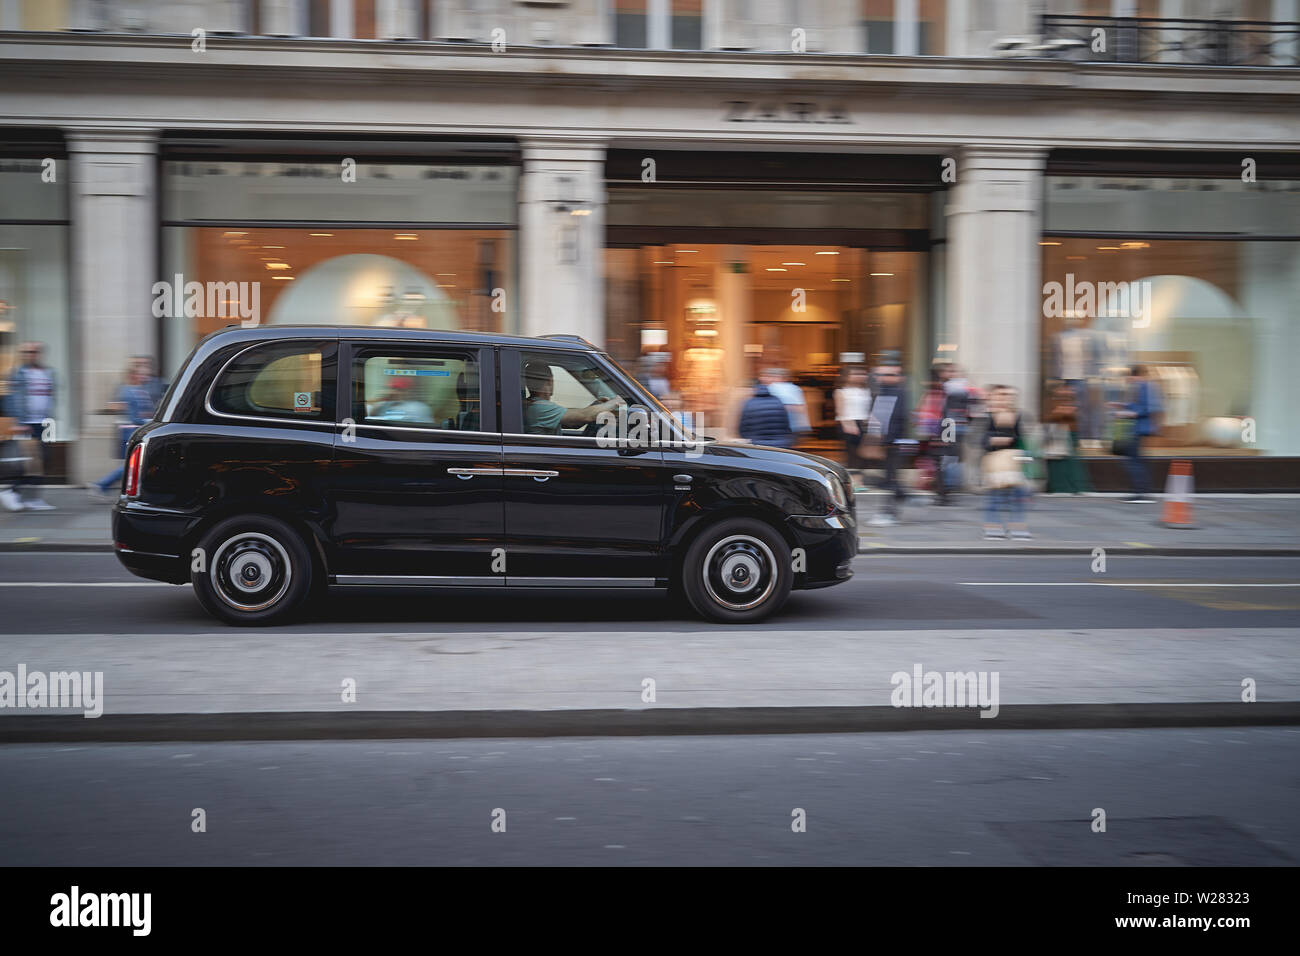 London, UK - June, 2019. A new model taxi in Regent Street. Black cabs are the most iconic symbol of London as well as Red Double Decker Buses. Stock Photo